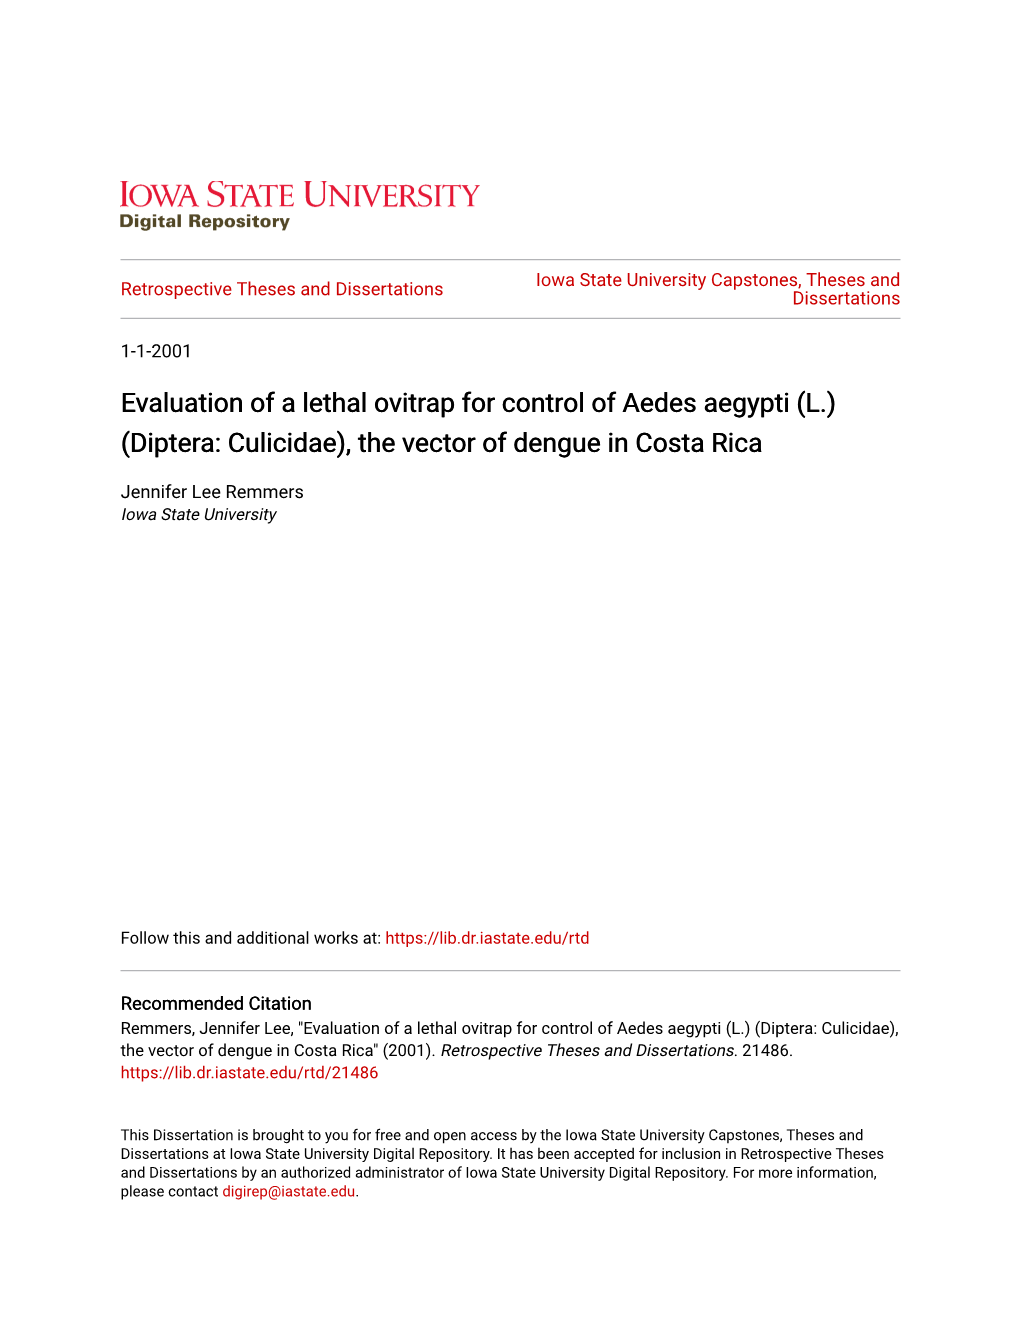 Evaluation of a Lethal Ovitrap for Control of Aedes Aegypti (L.) (Diptera: Culicidae), the Vector of Dengue in Costa Rica